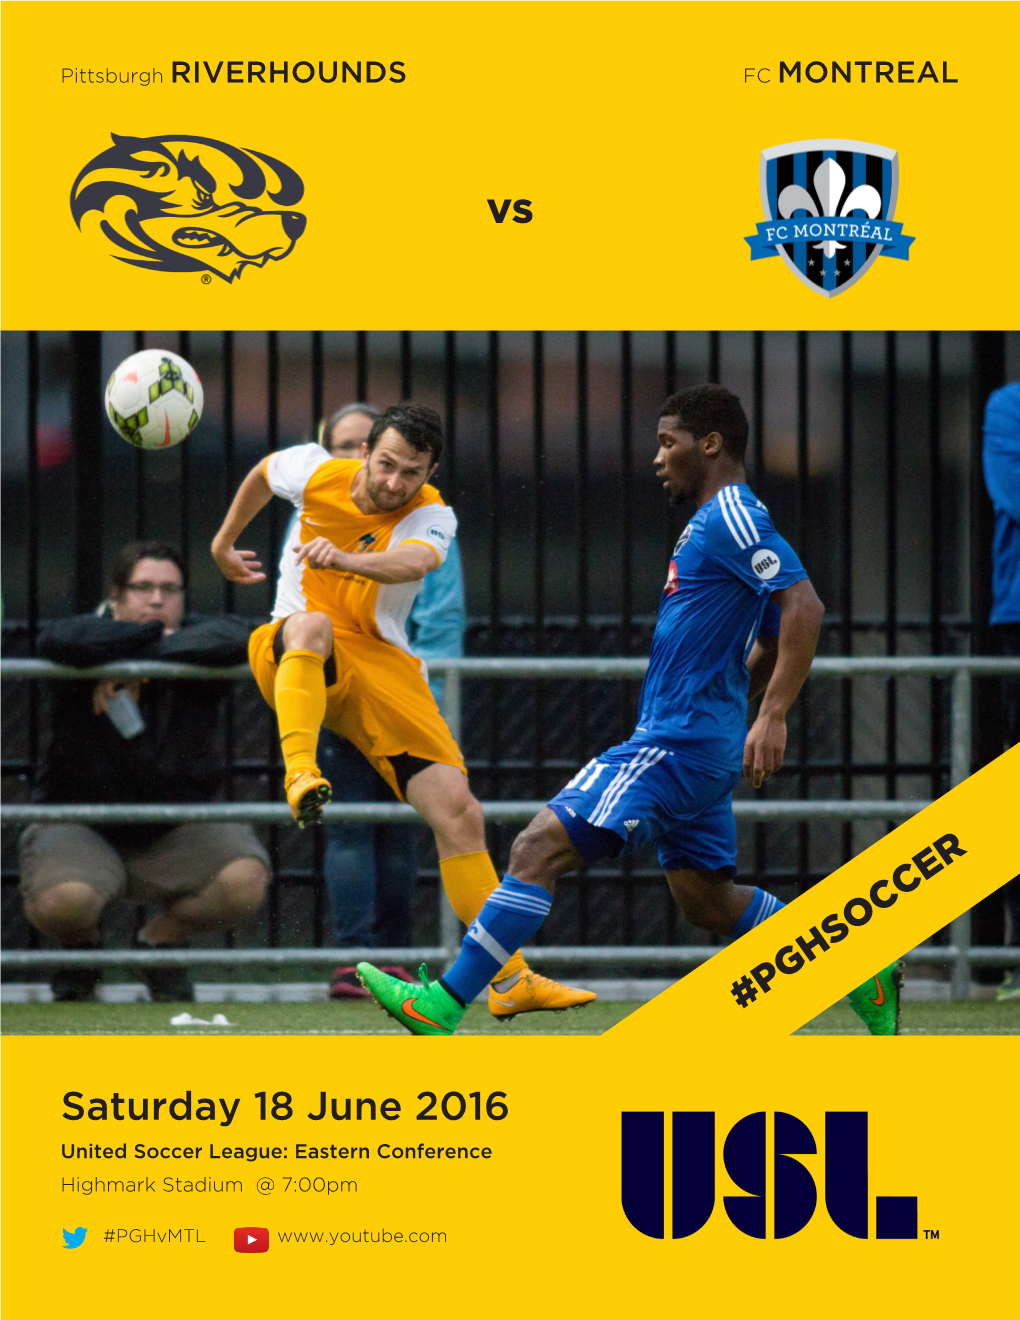 Saturday 18 June 2016 United Soccer League: Eastern Conference Highmark Stadium @ 7:00Pm